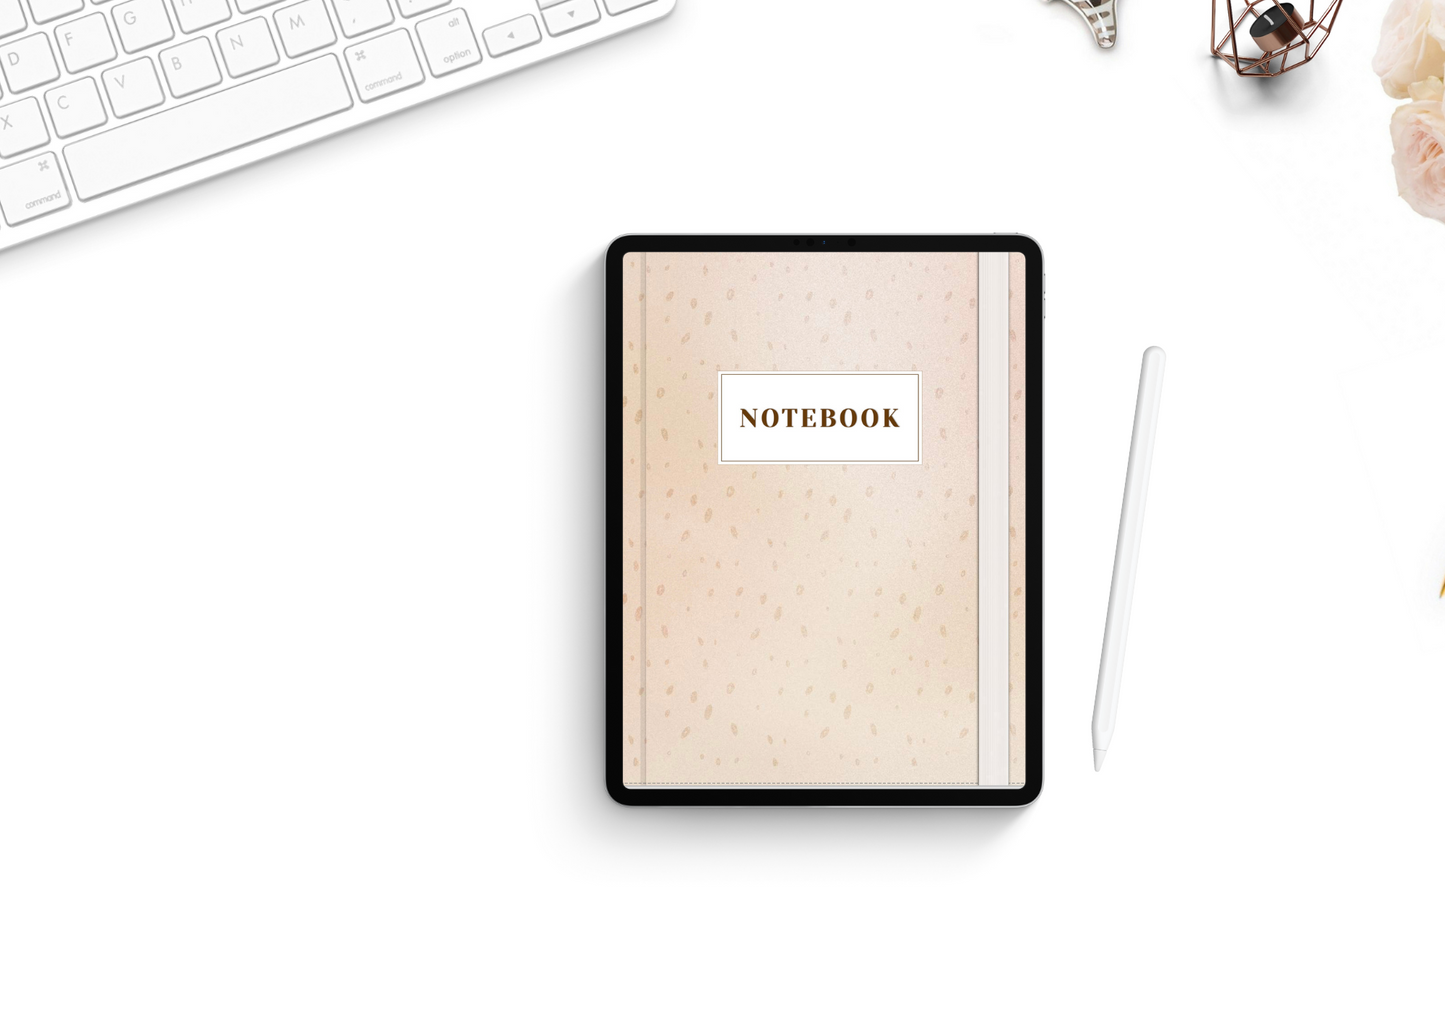 30 Subject Digital Notebook with Hyperlinked Tabs | Take Notes, Journal or Plan For Goodnotes 5